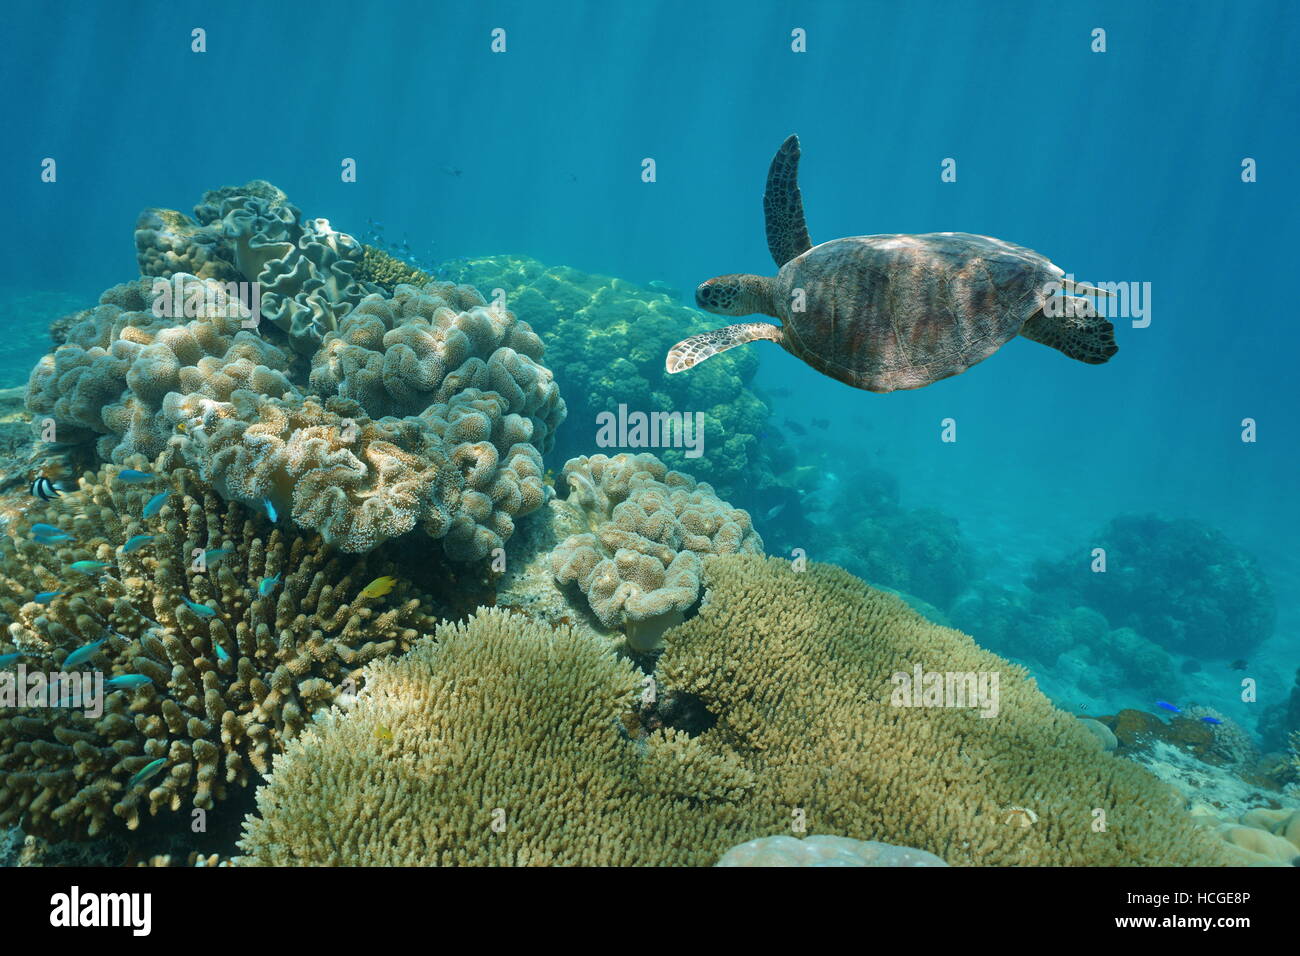 A green sea turtle underwater with corals, New Caledonia, south Pacific ocean Stock Photo